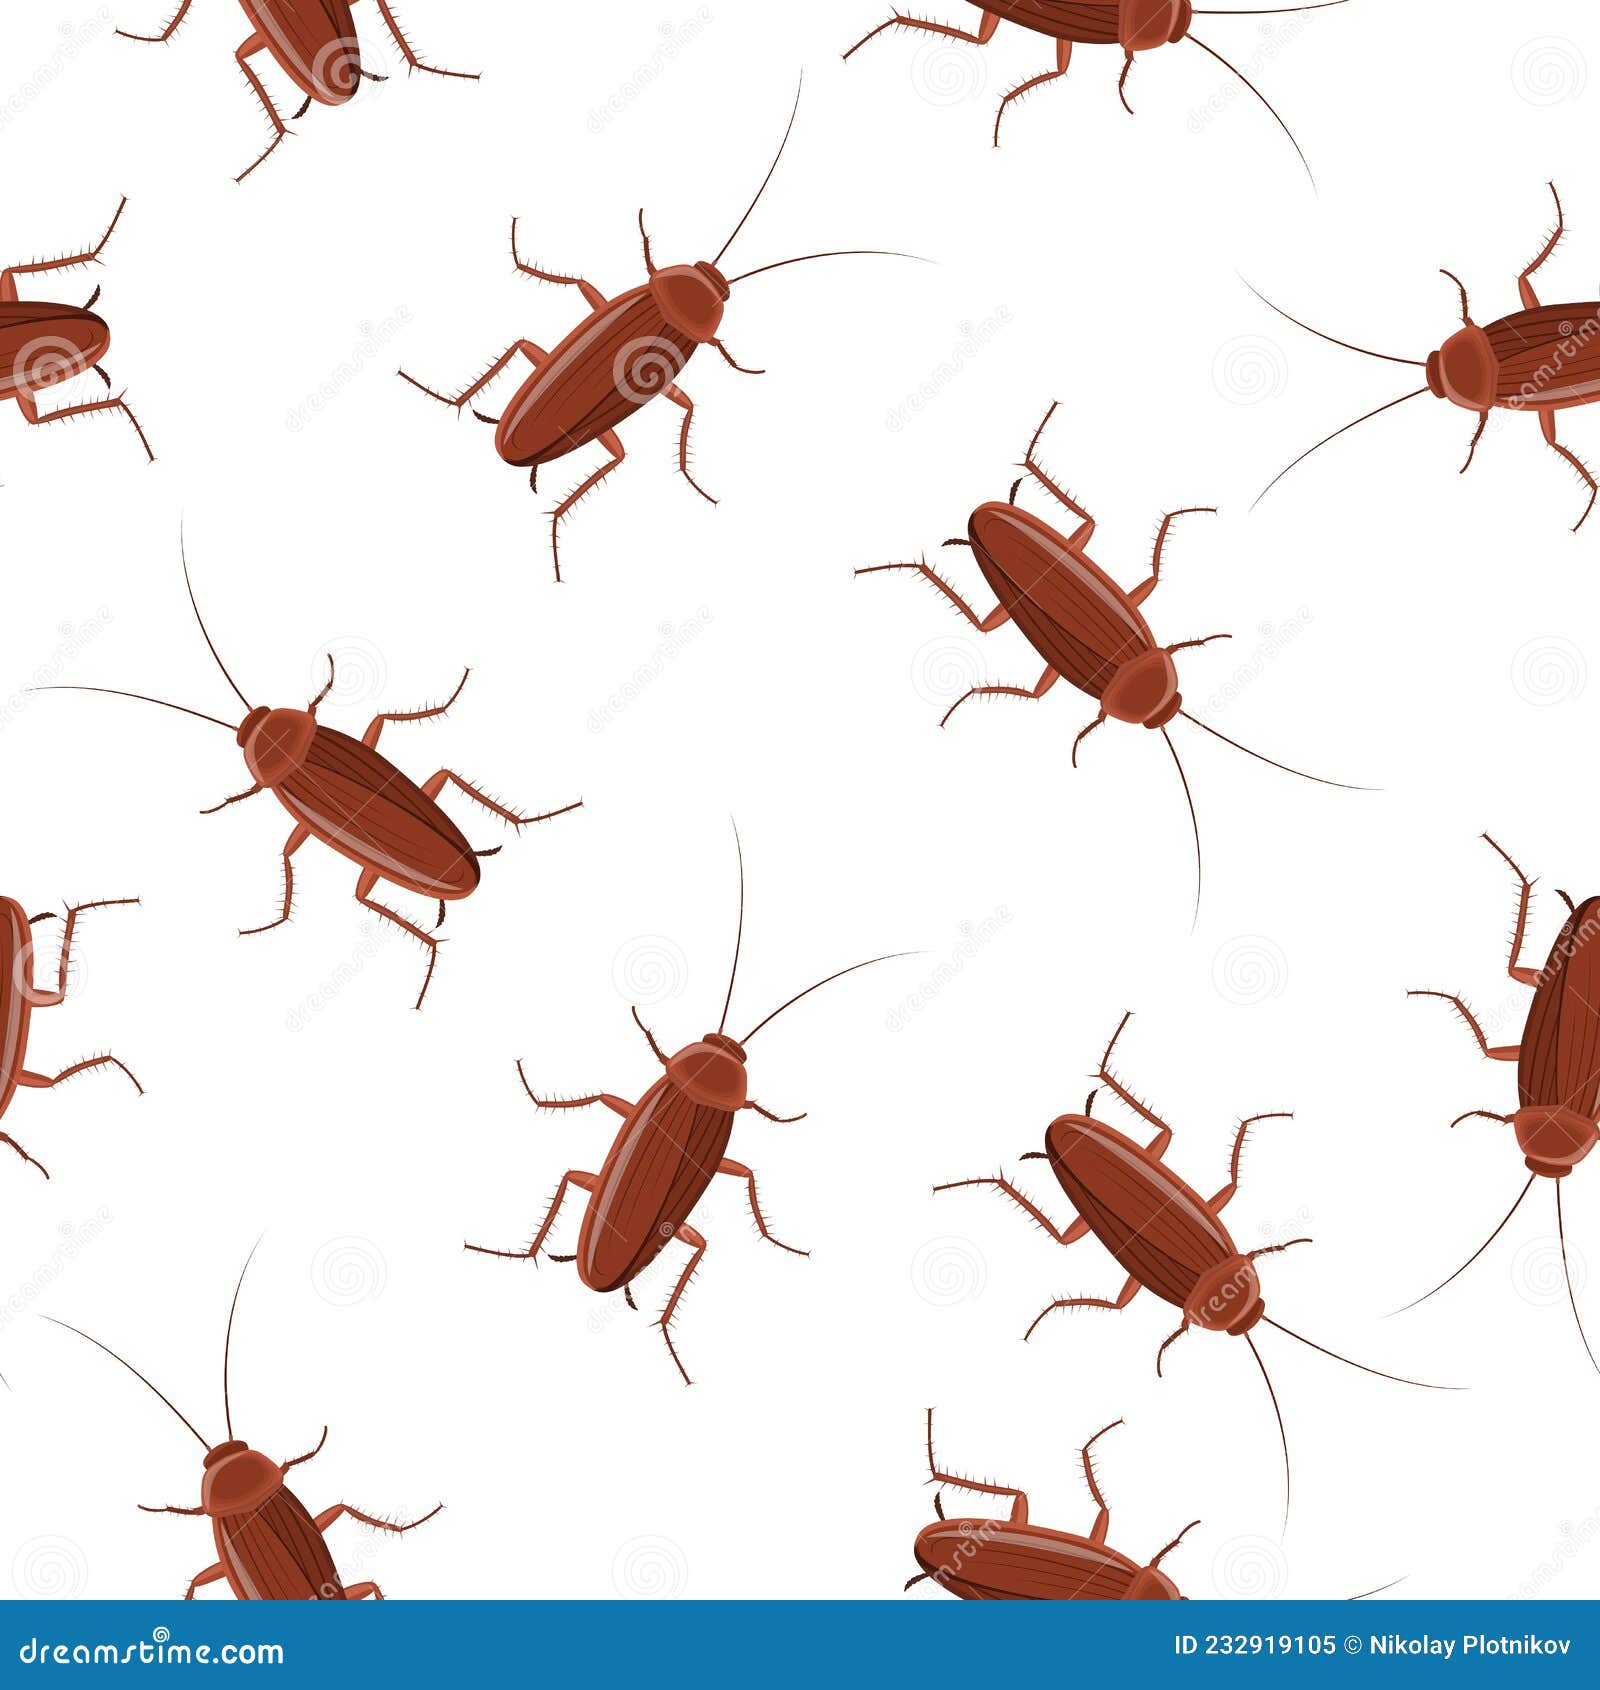 Cockroach wallpaper on white background Royalty Free Vector